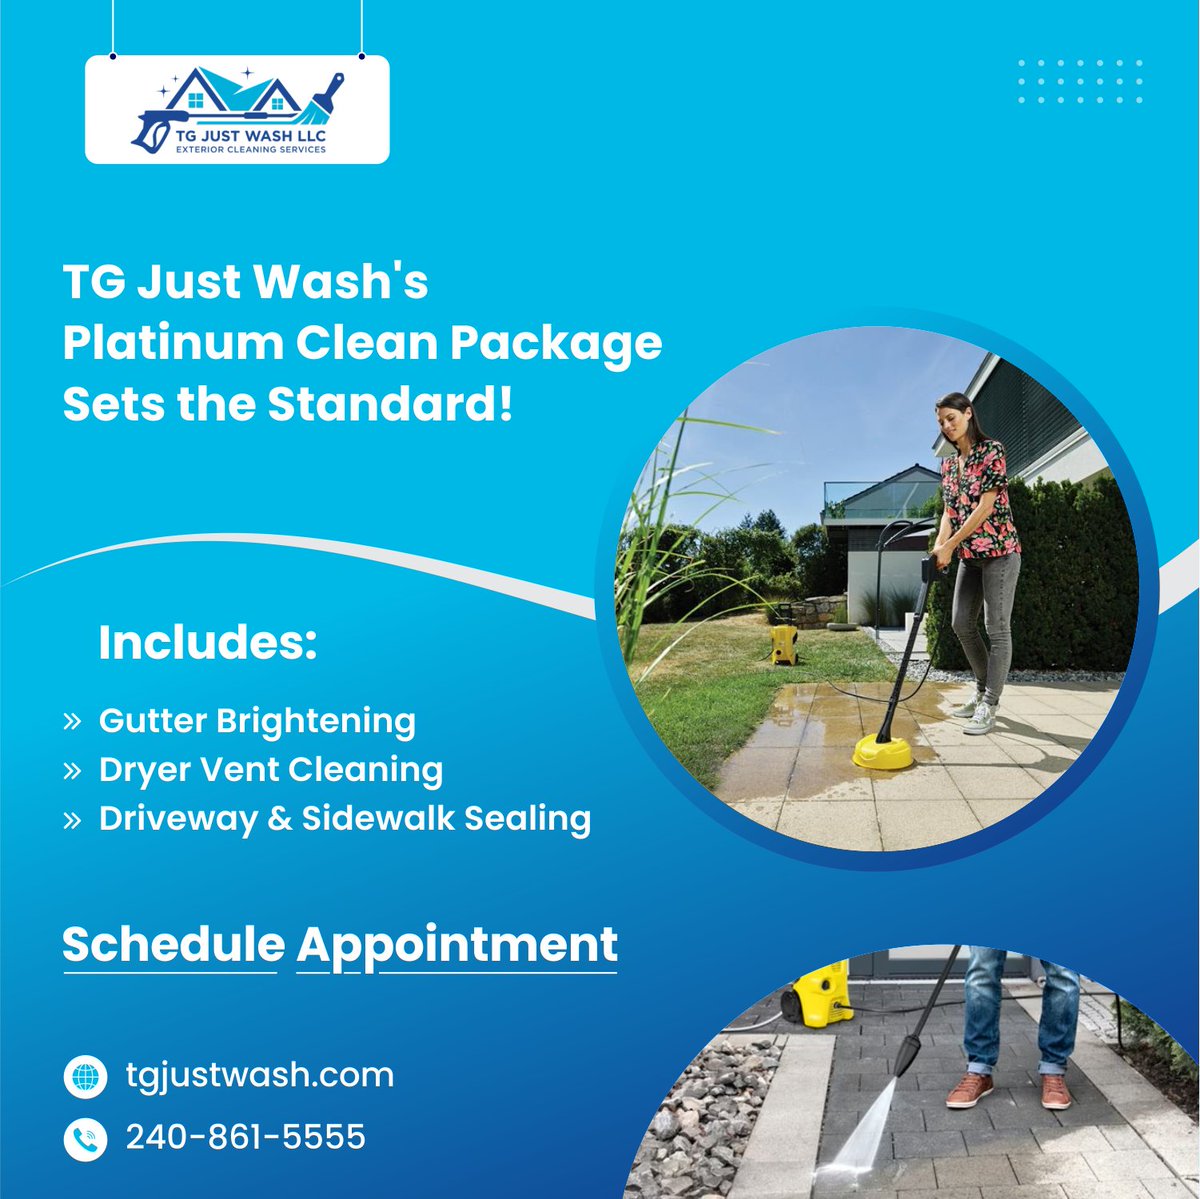 Discover expert exterior cleaning services at TG Just Wash LLC. 

tgjustwash.com/packages/resid…

#tgjustwash #exteriorcleaning #residentialspaces #commercialspaces #cleaning #highpressurewashing #softwashing #specializedcleaning #washingtondc #maryland #riverdale #virginia #usa